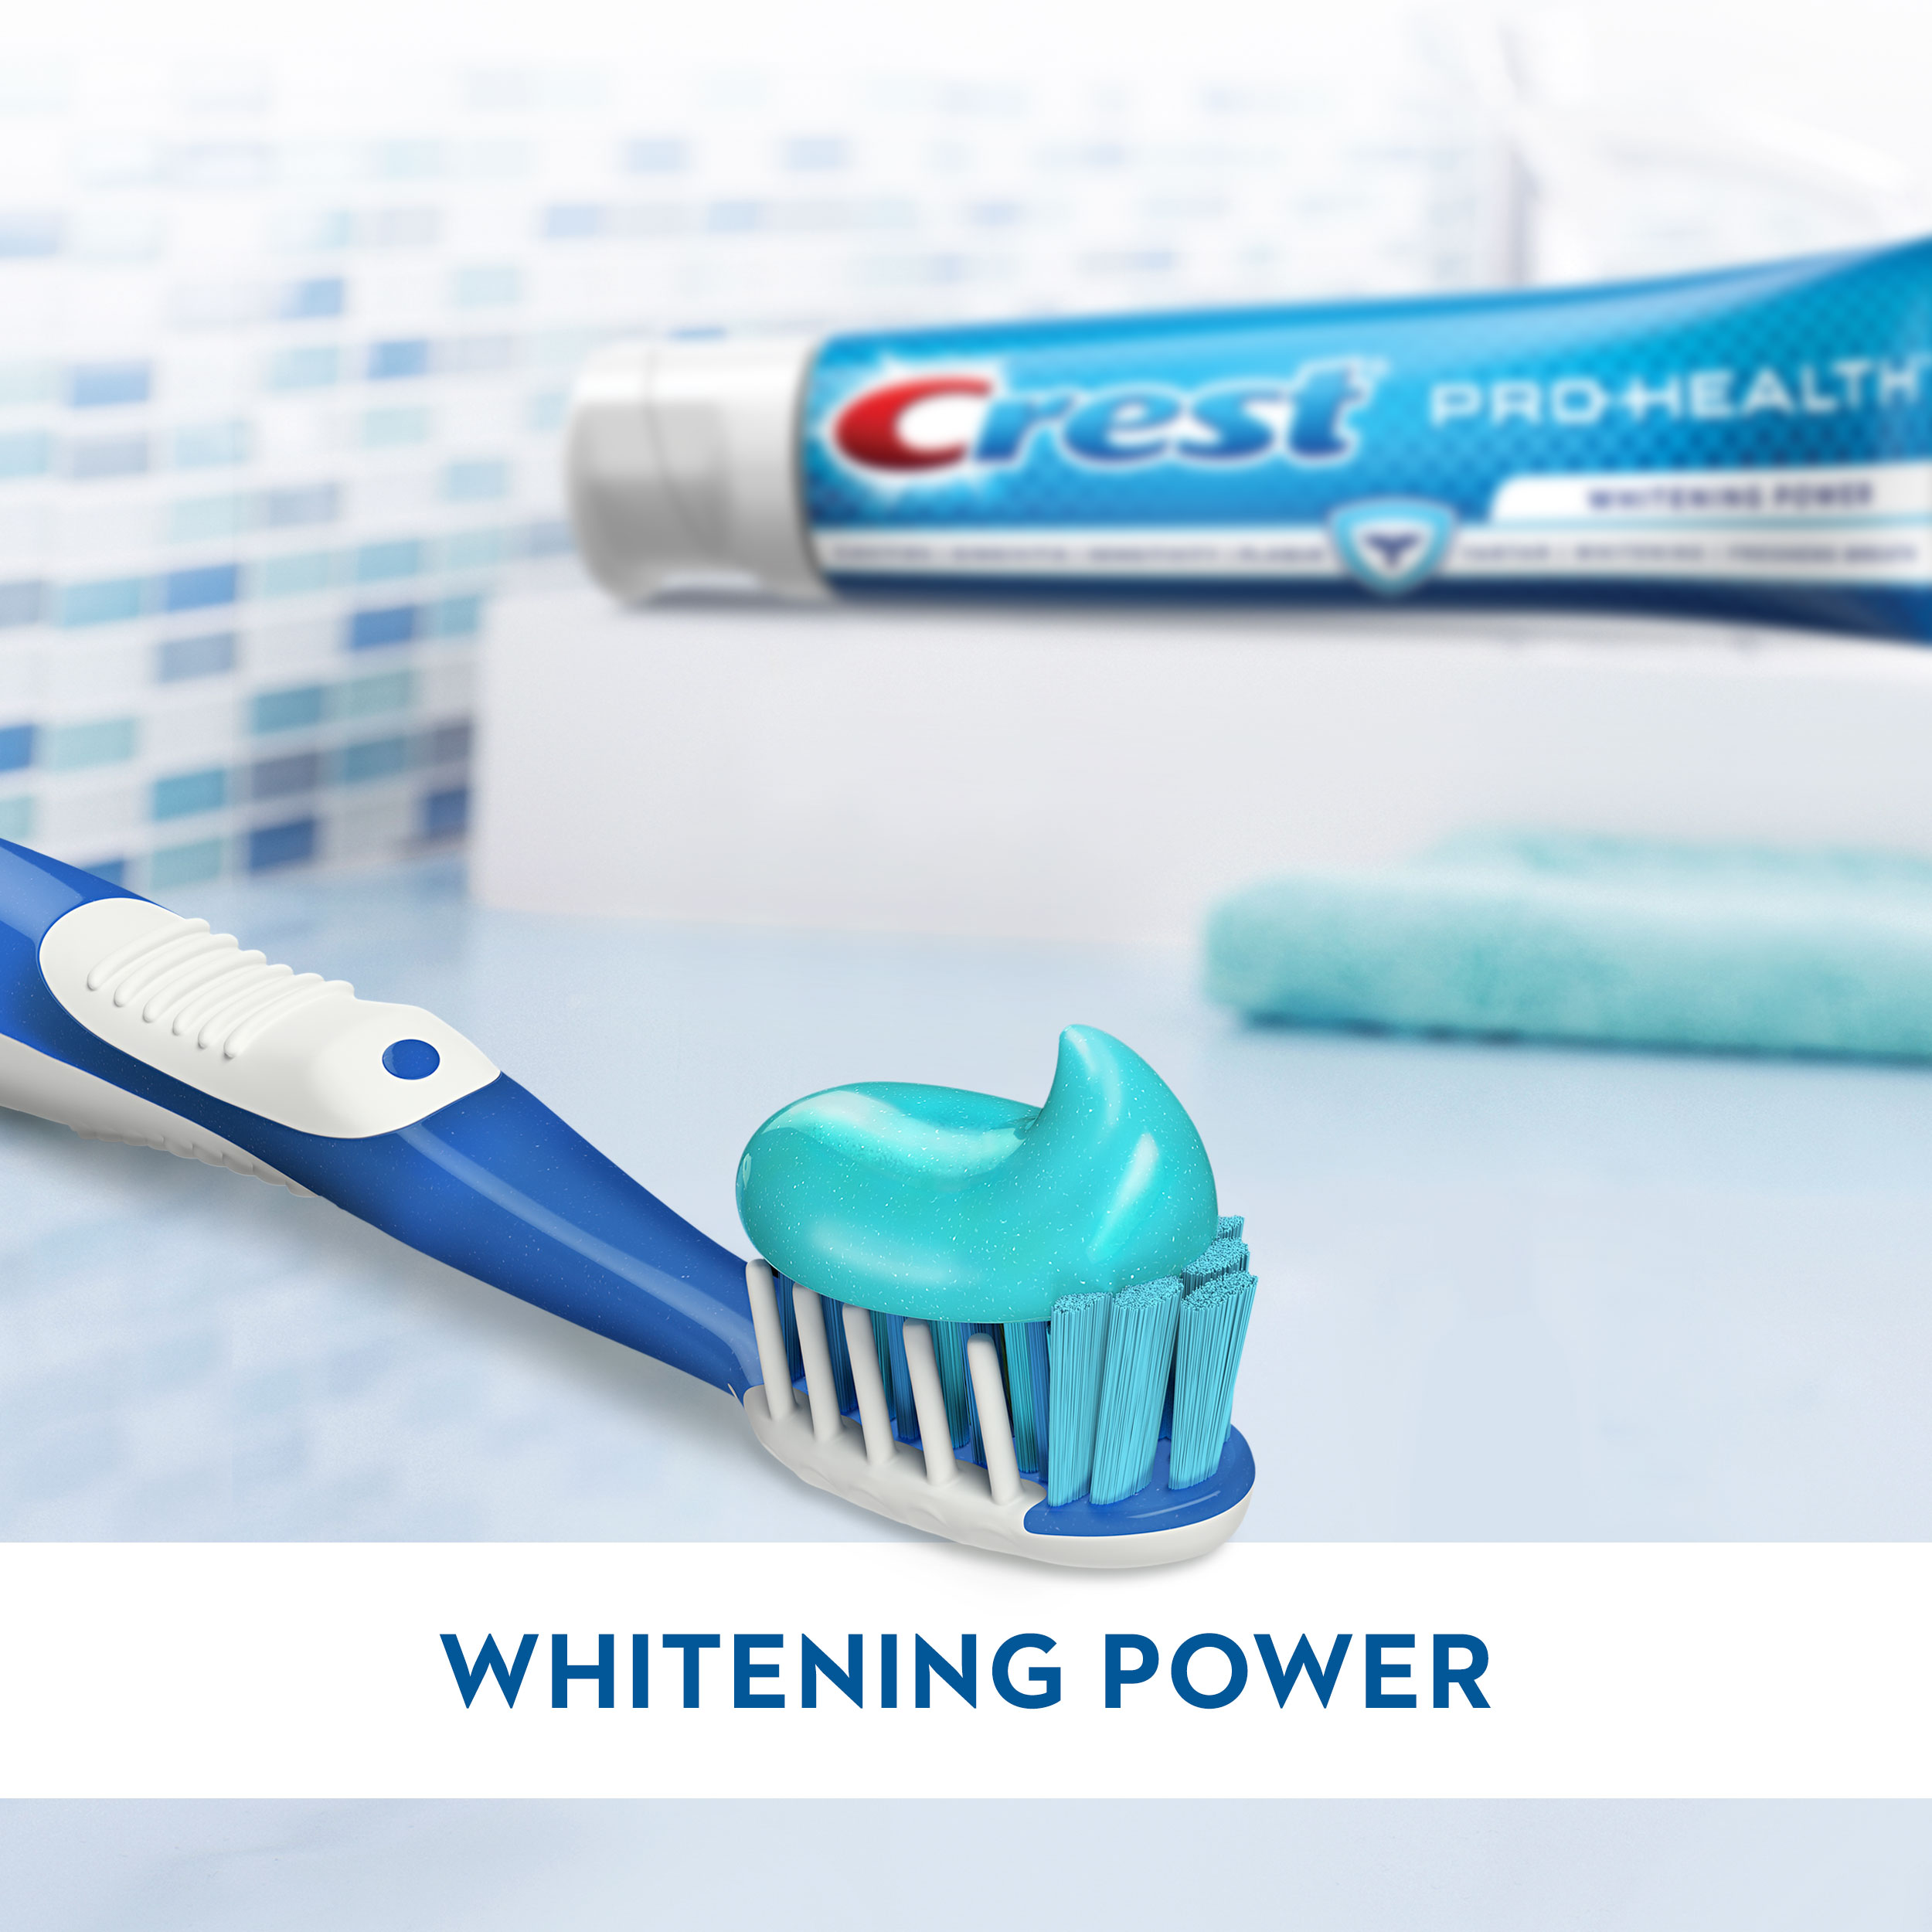 Crest Pro-Health Whitening Power Toothpaste, 4.6 oz, Pack of 3 - image 2 of 7